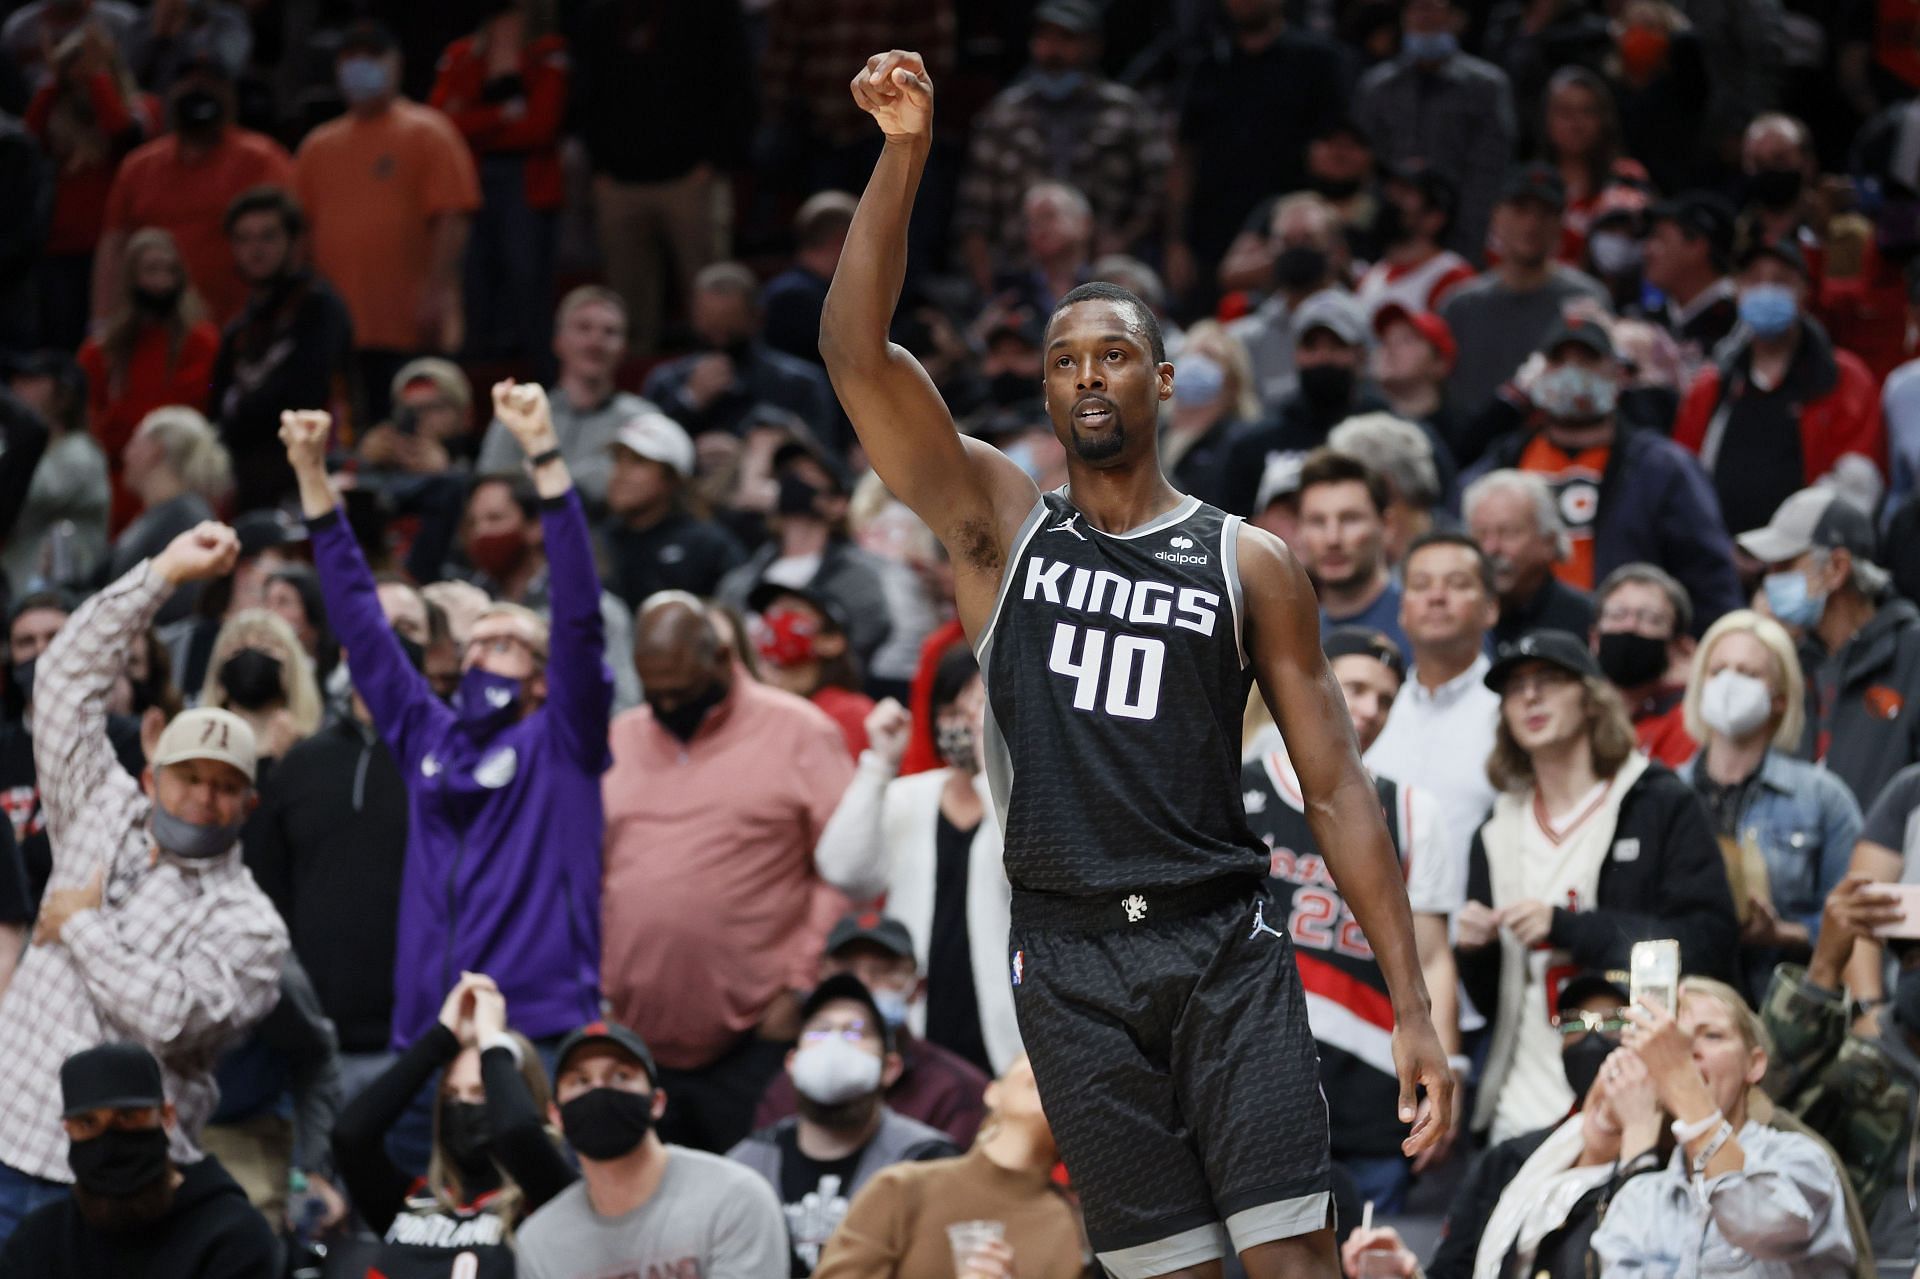 The Sacramento Kings secured a 124-121 win over the Portland Trail Blazers in their opening game of the season